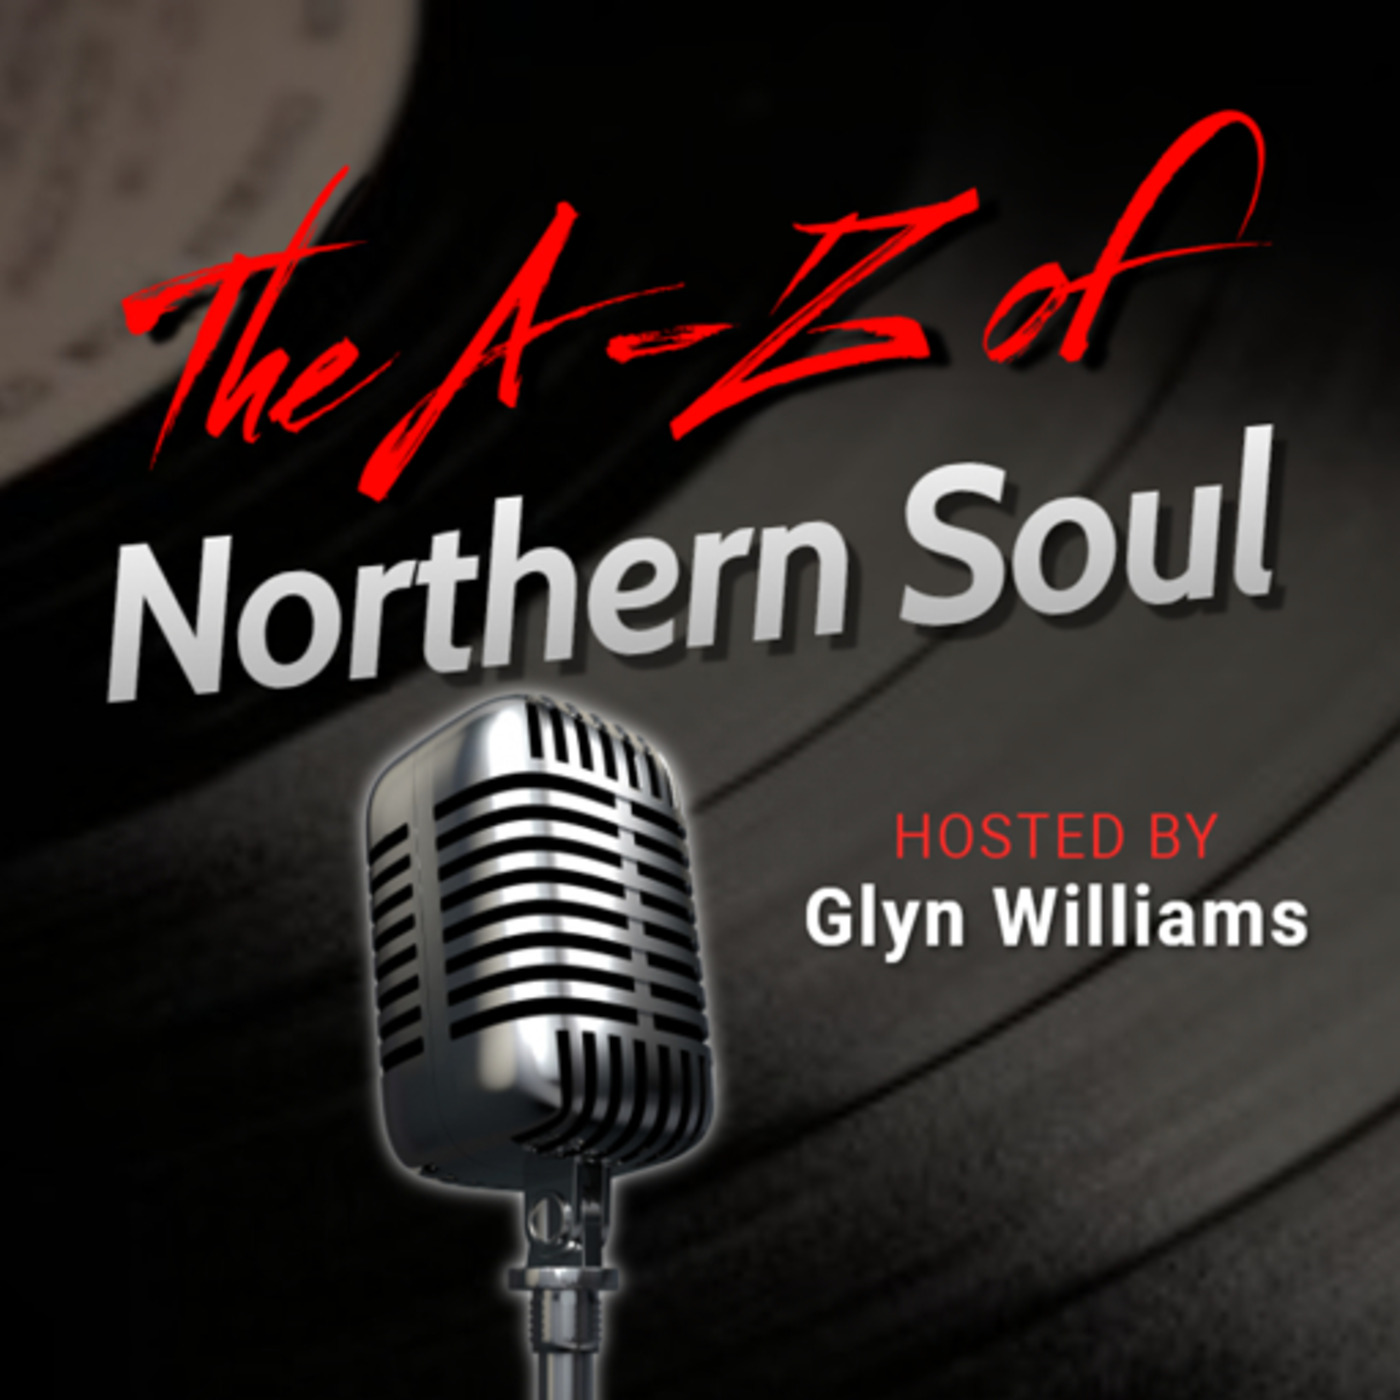 The A-Z of Northern Soul E073